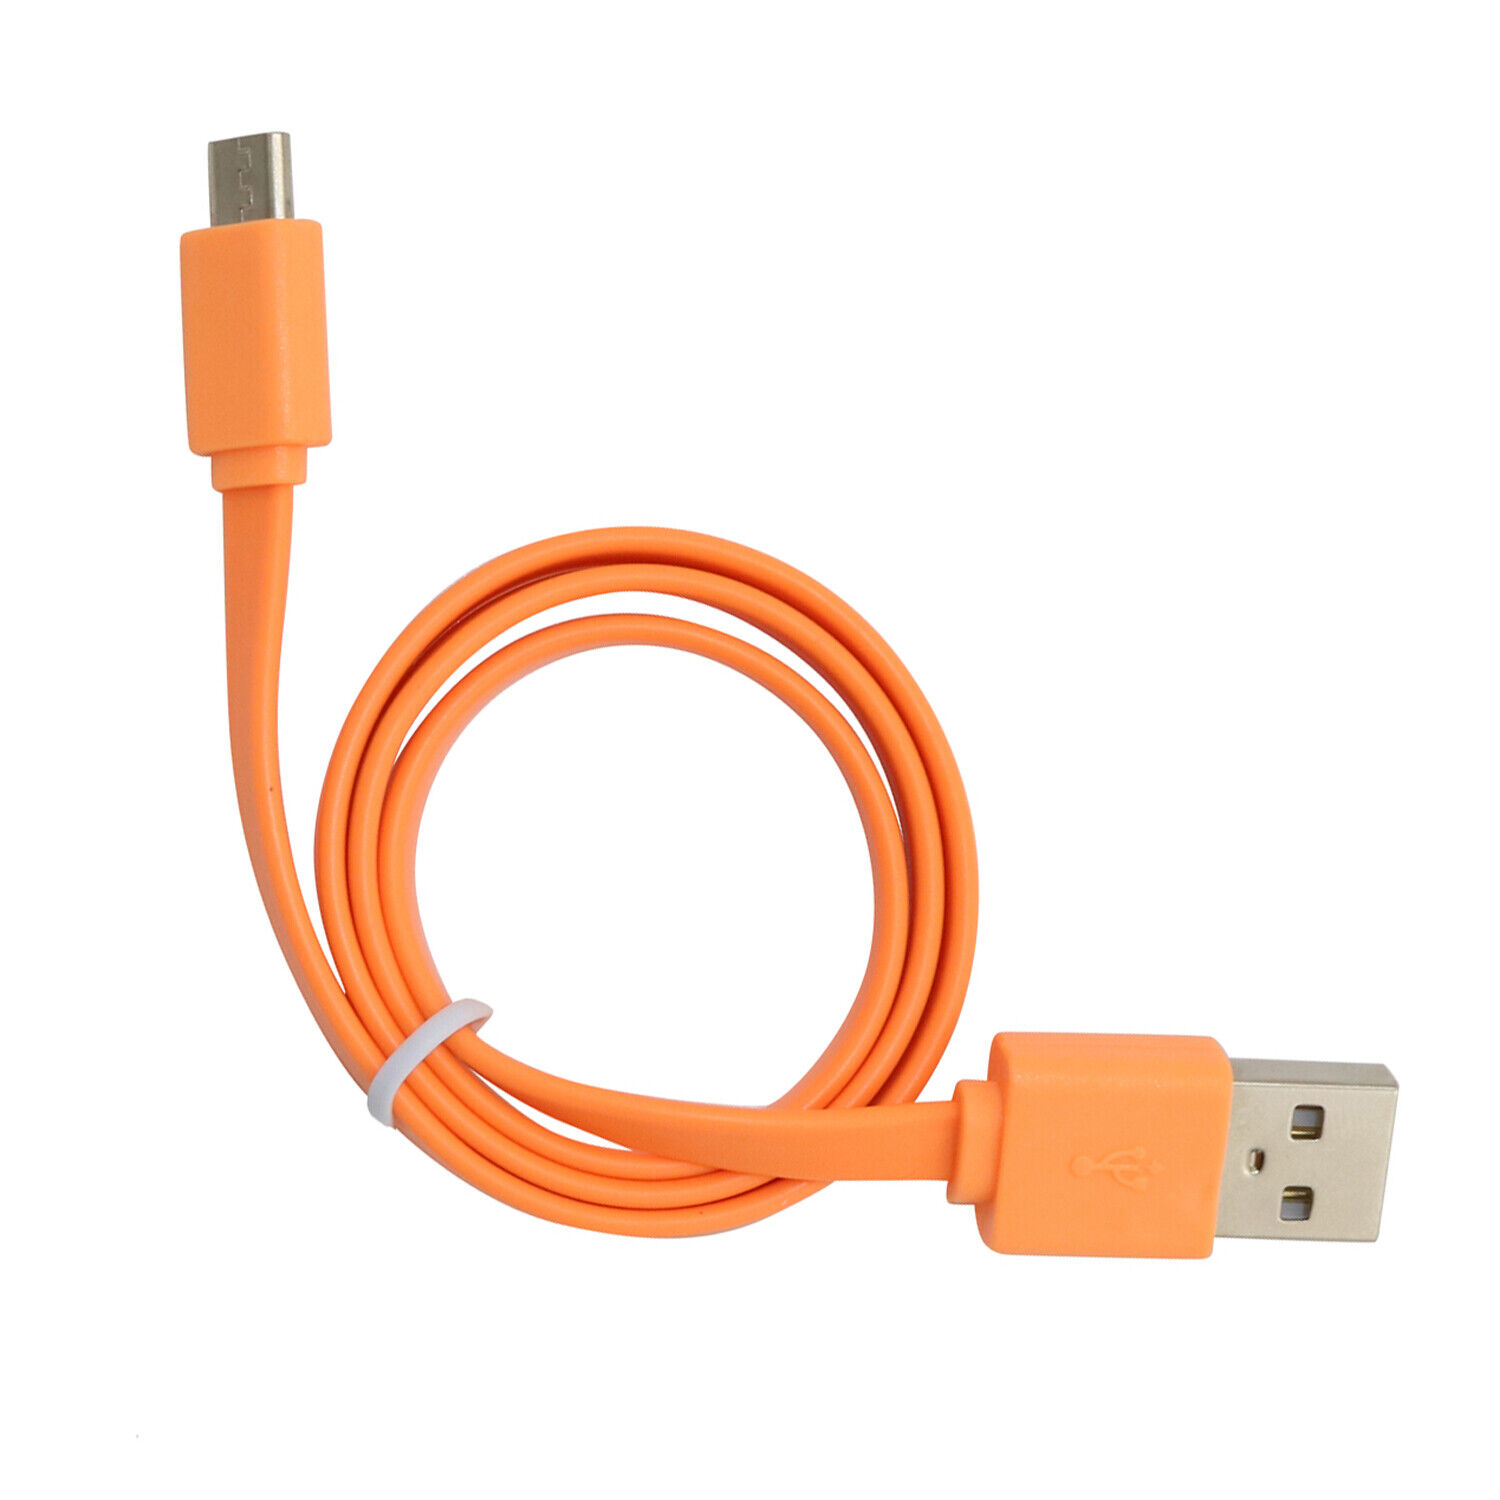 USB Charger Cable Cord for JBL Flip 4 3 2 Bluetooth Speaker Orange USB Charger Cable Cord for JBL Flip 4 3 2 Bluetooth